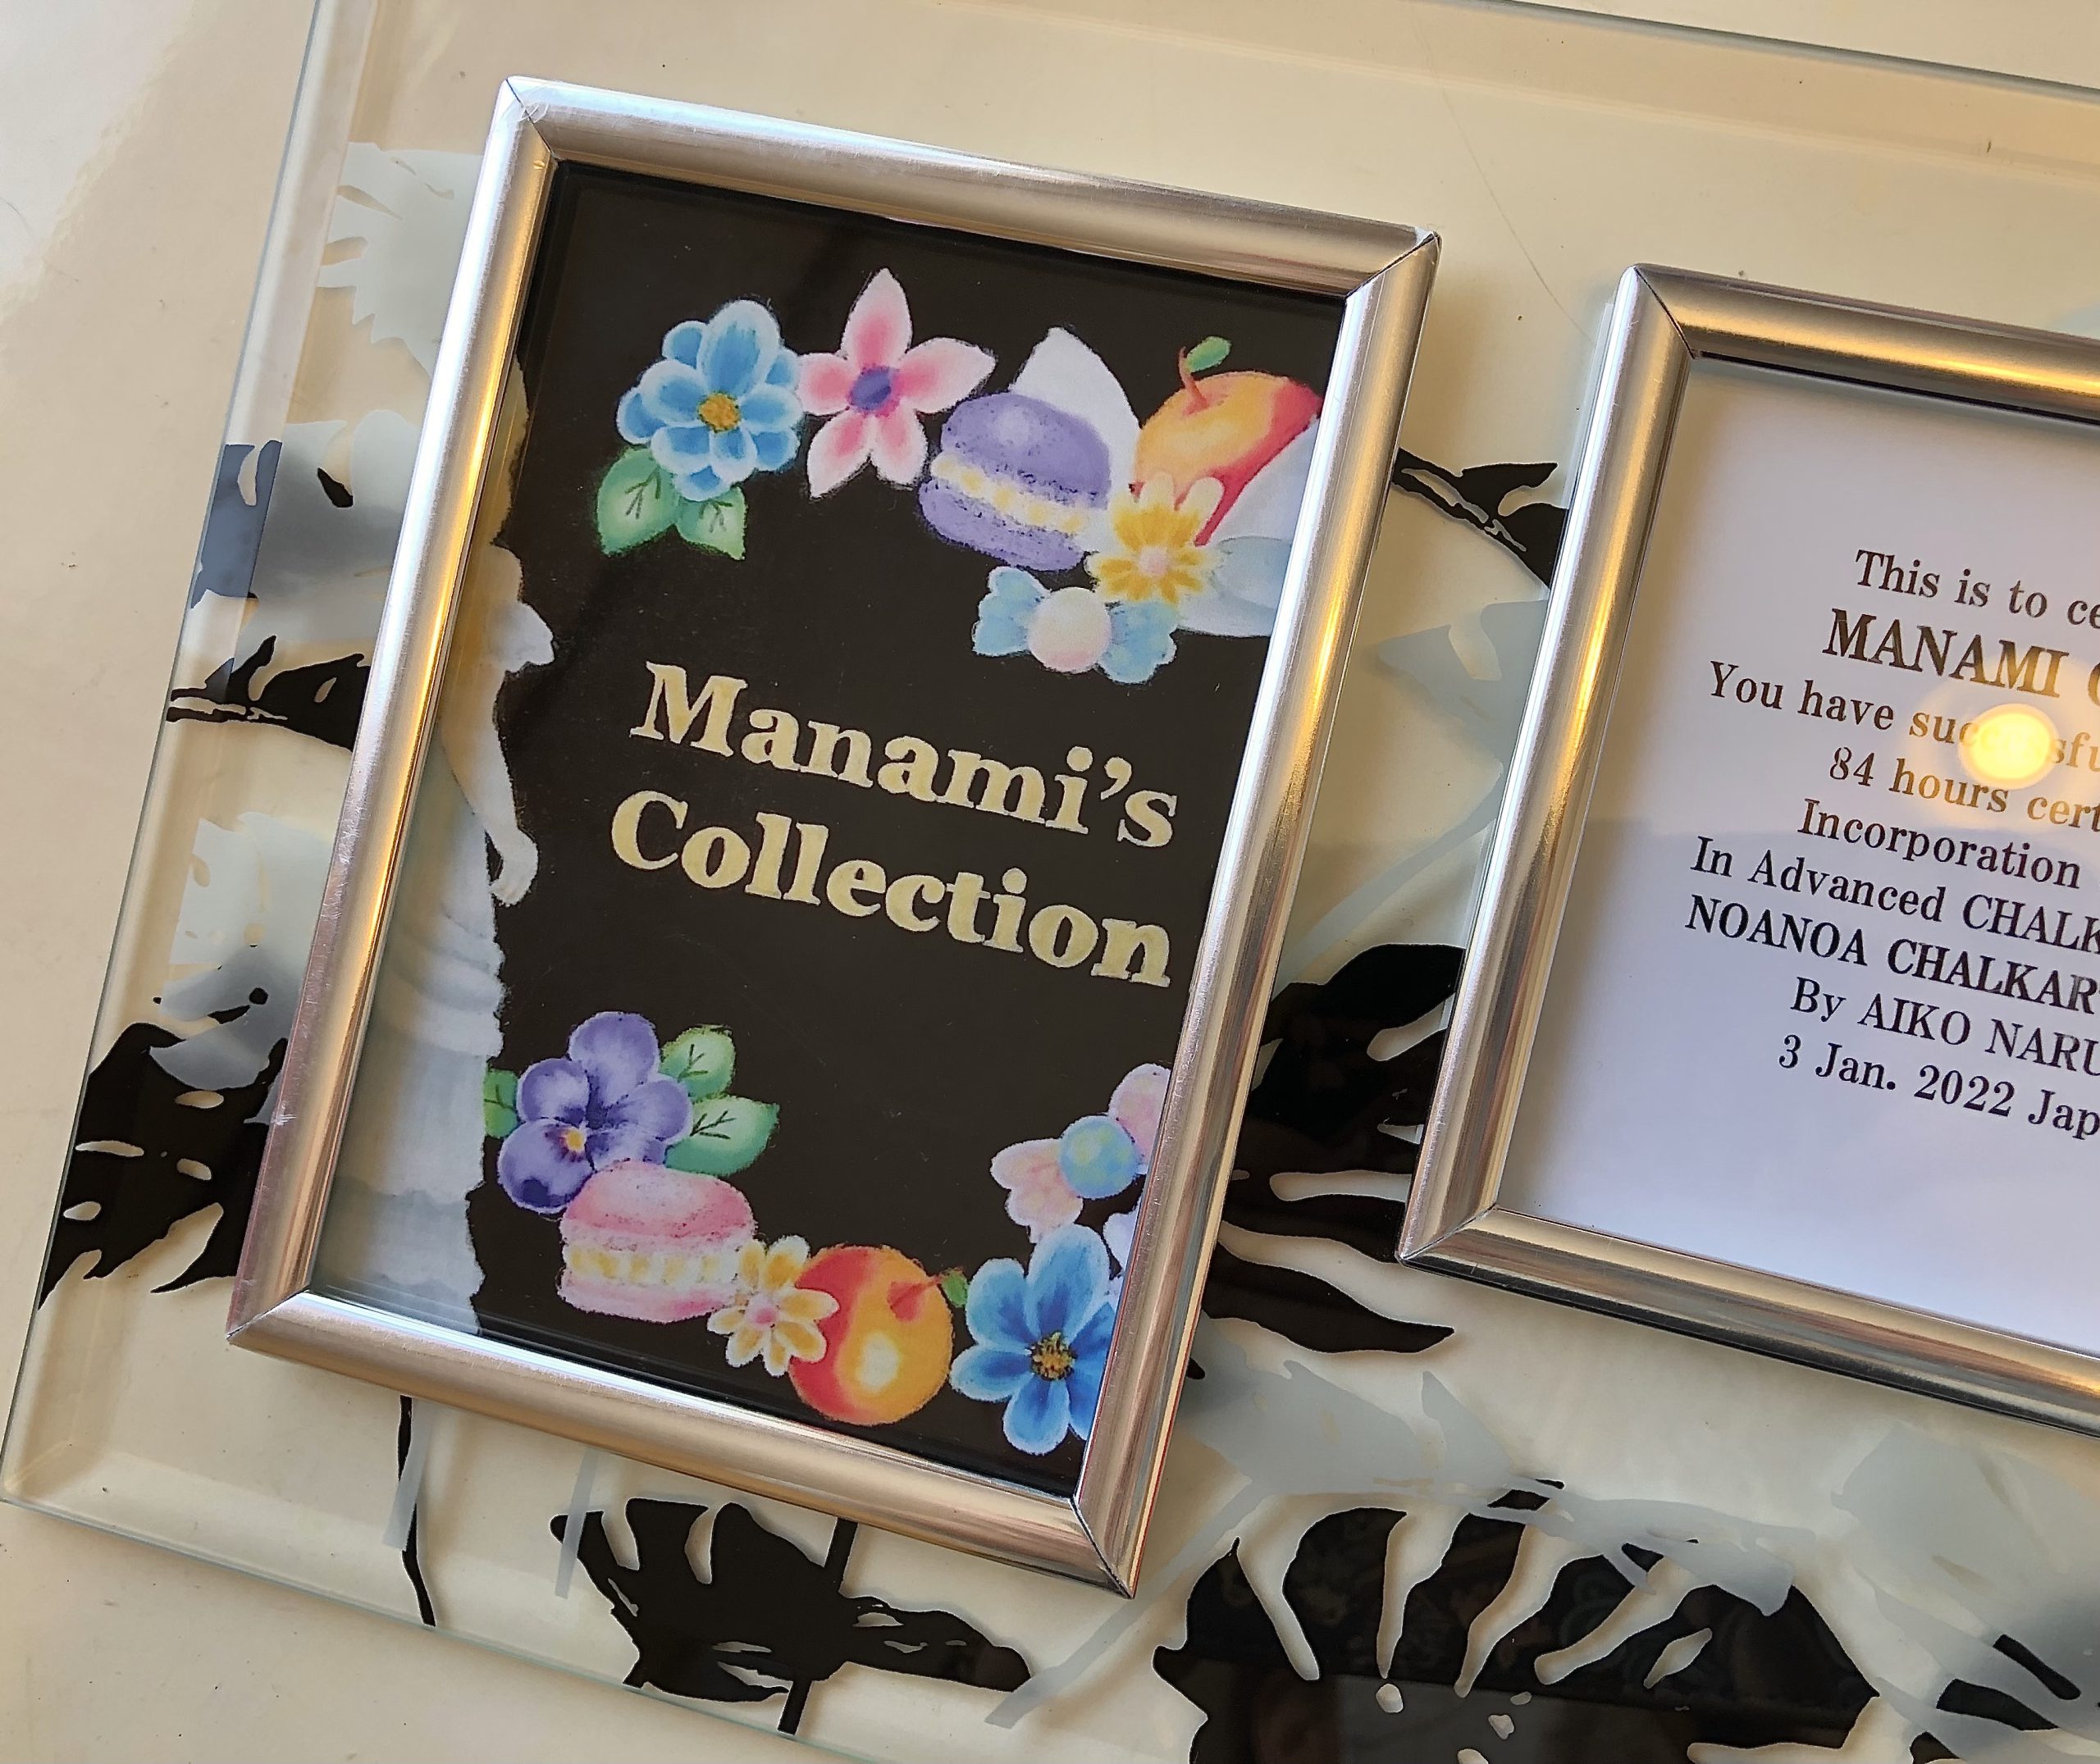 「Ｍanami’s Collection」